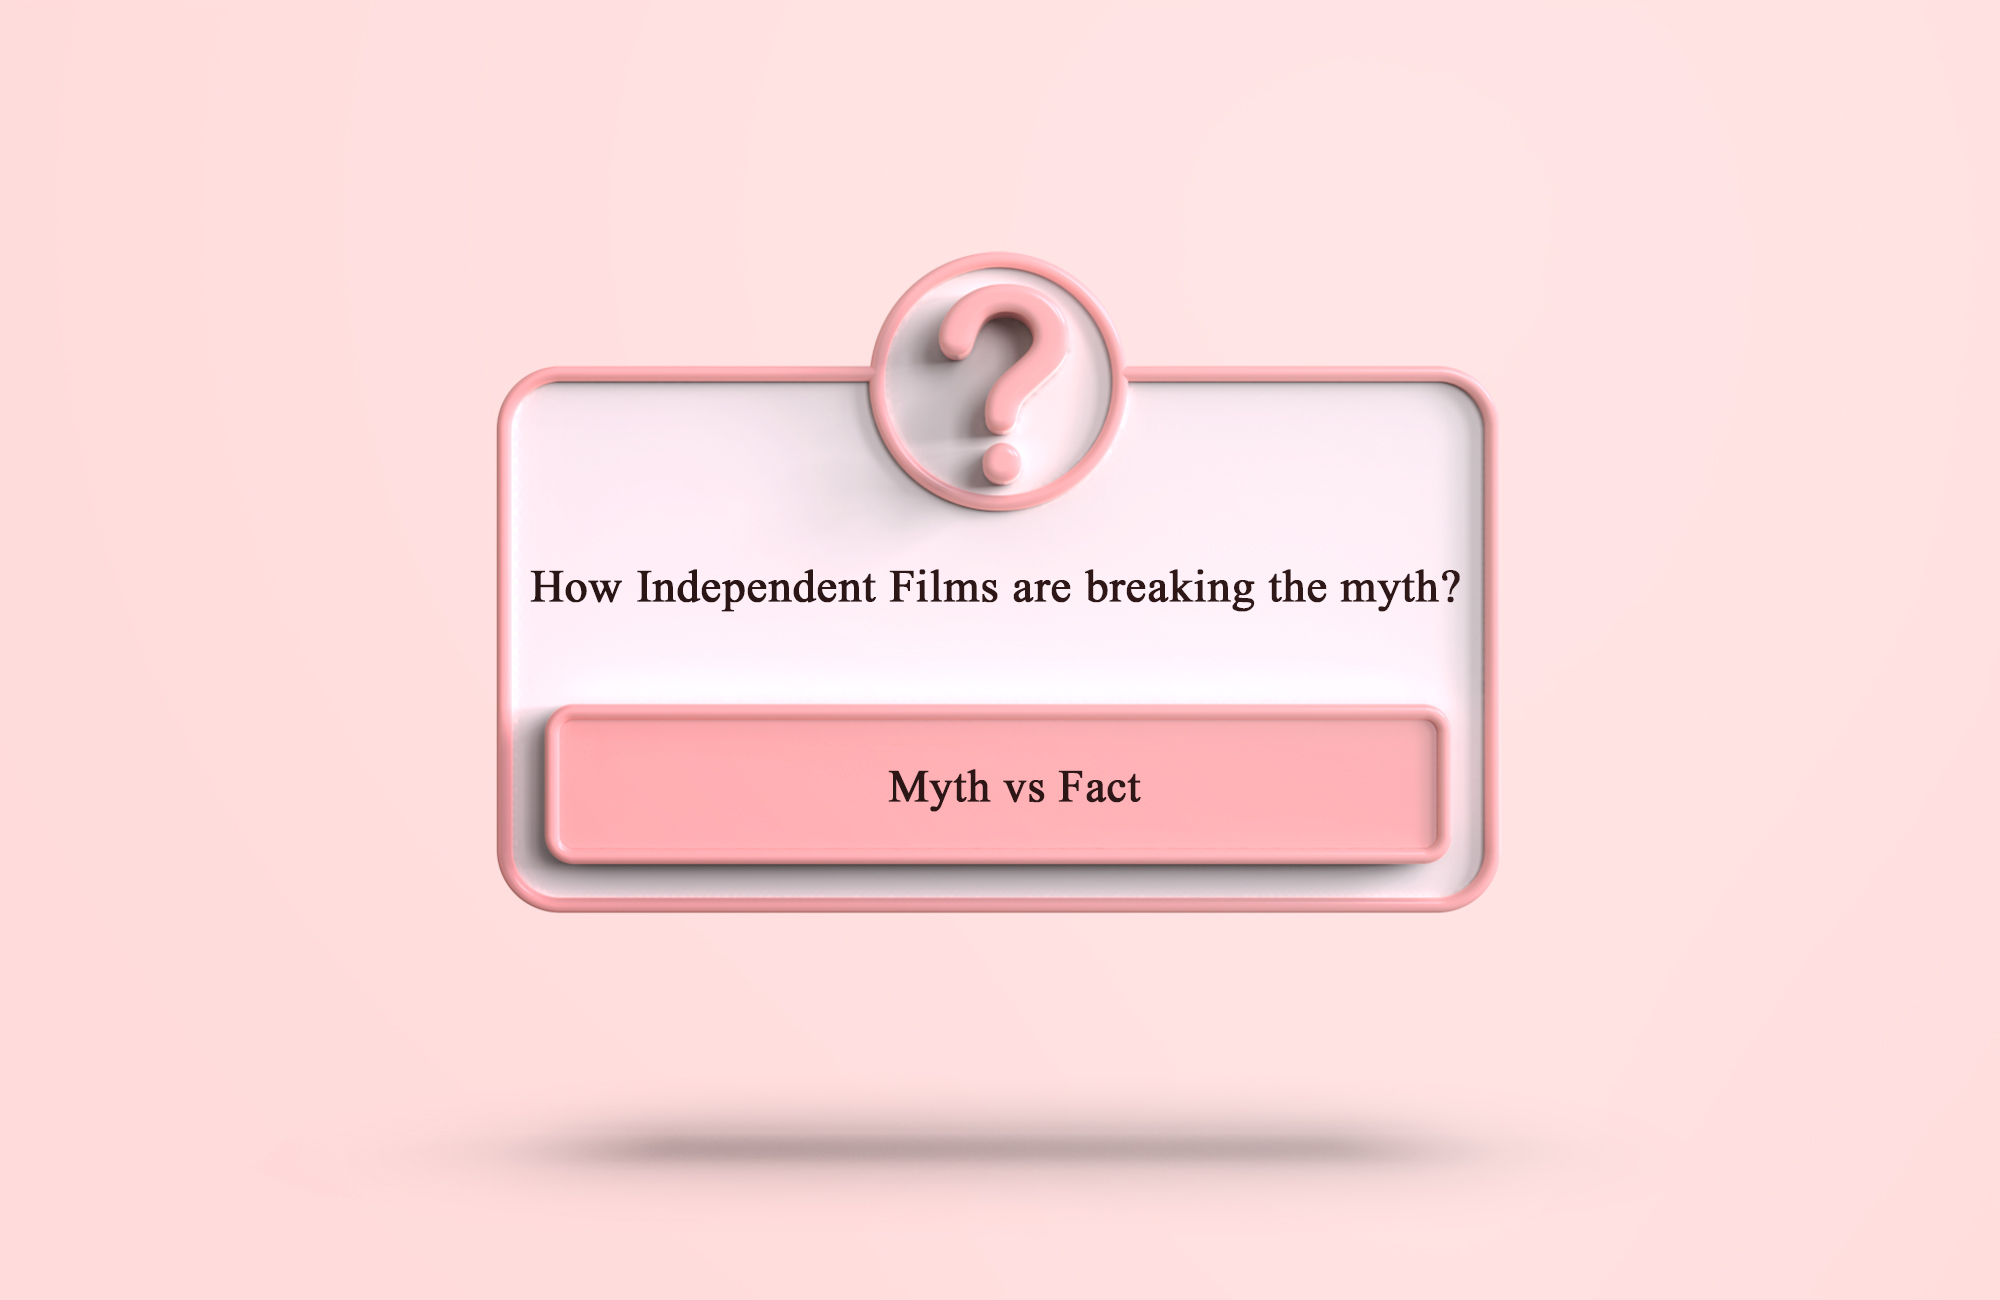 How Independent Films are breaking the myth?